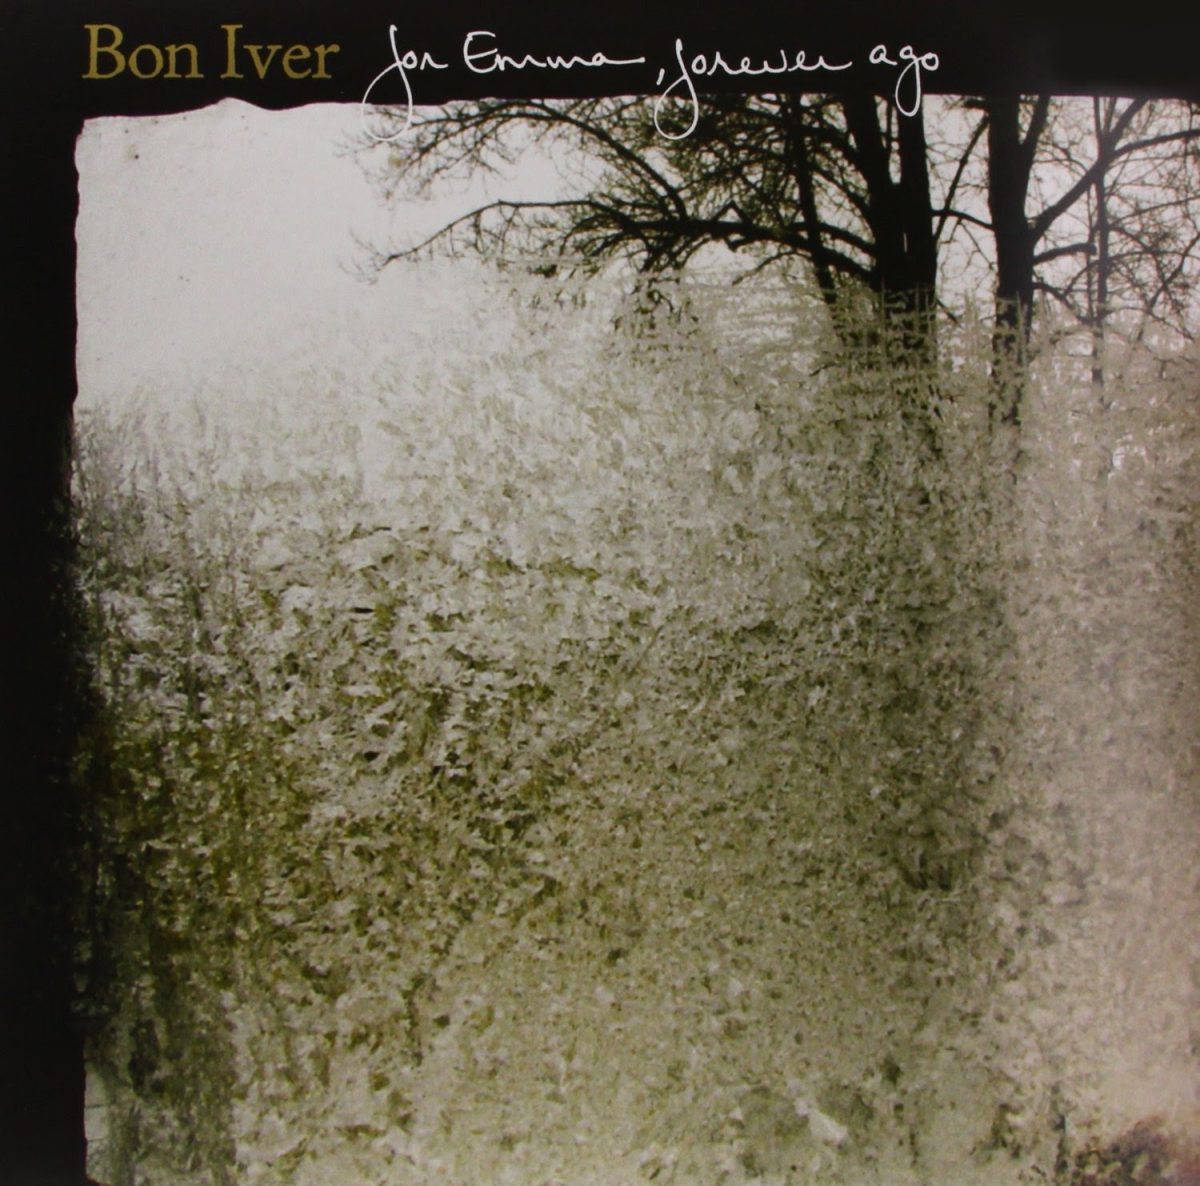 For Emma, Forever Ago was released by Bon Iver under the record label Jagjagwuar.